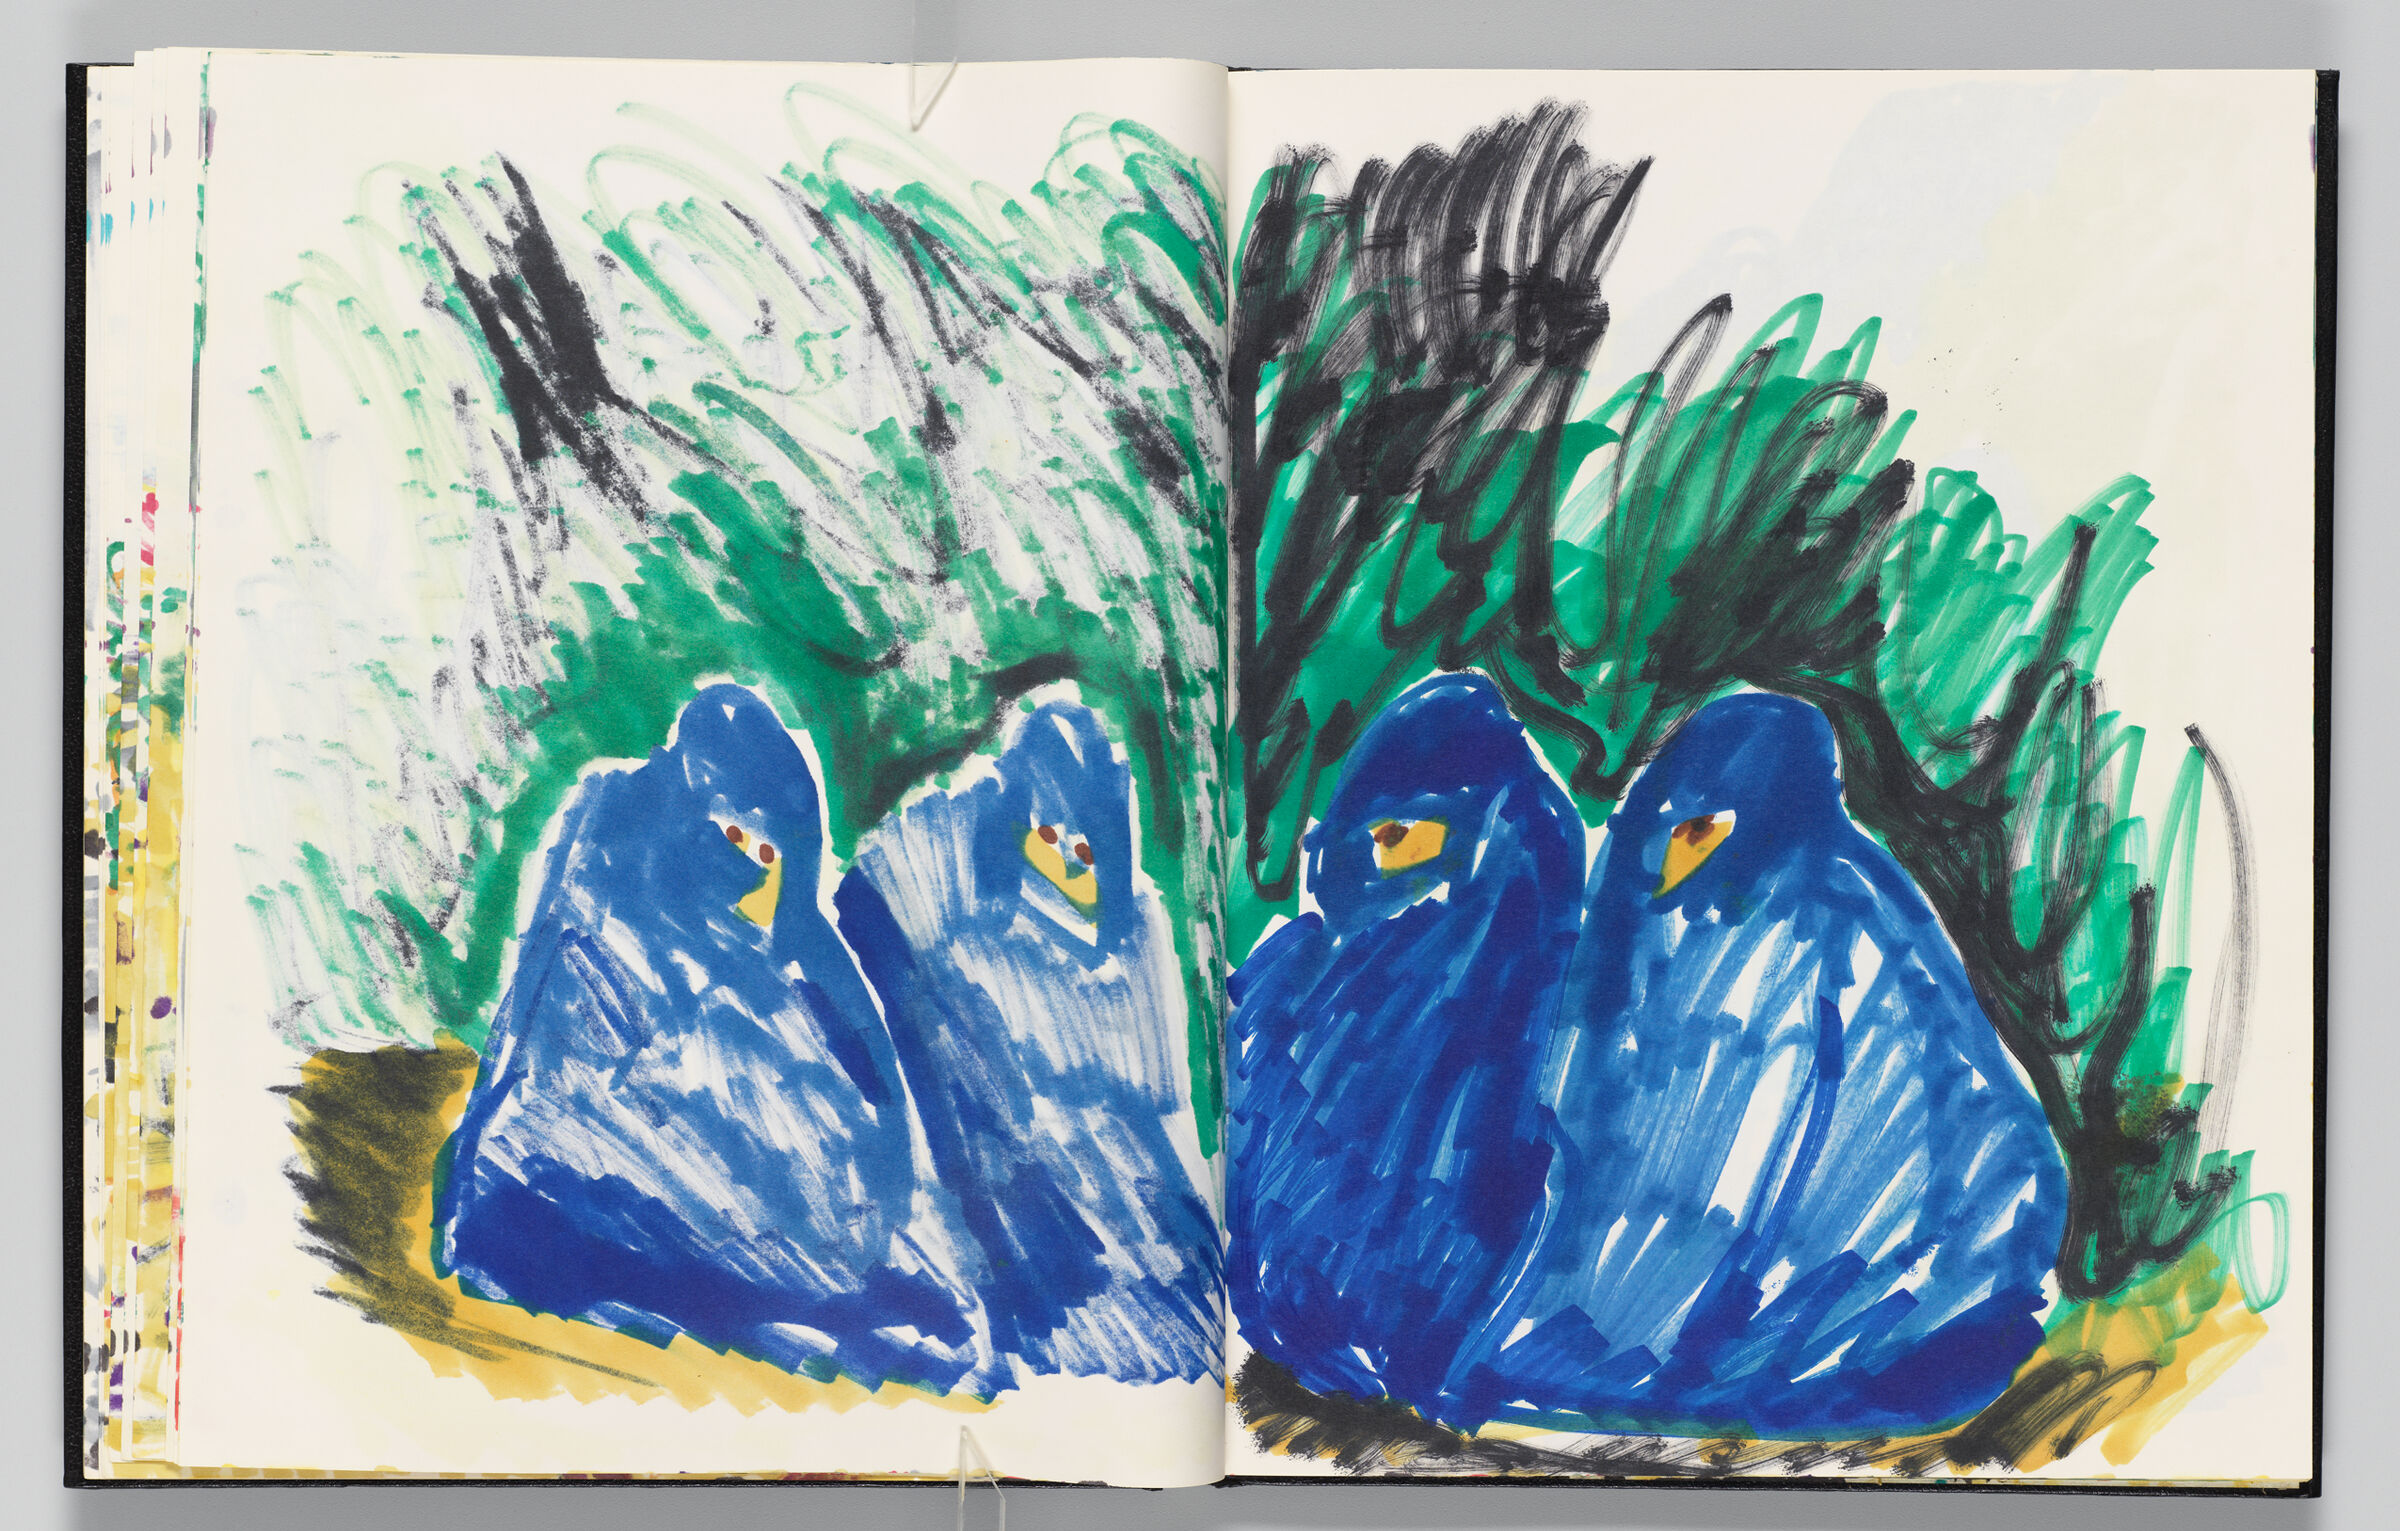 Untitled (Bleed-Through Of Previous Page, Left Page); Untitled (Two Veiled Figures, Right Page)